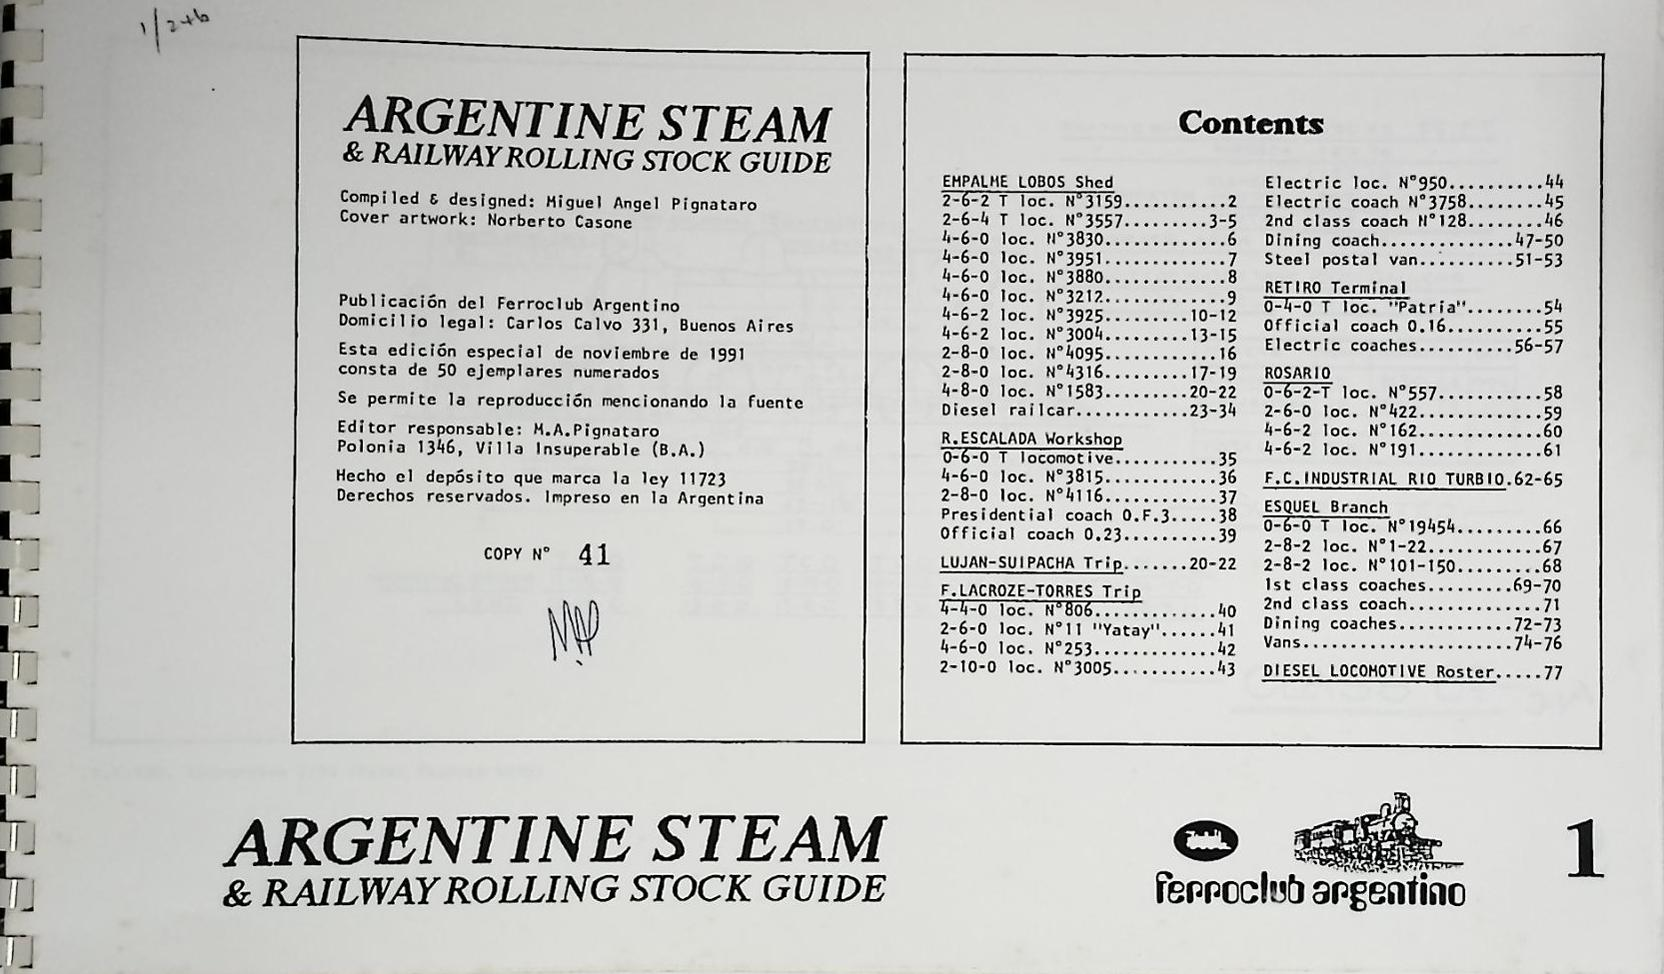 Argentine Steam & Railway Rolling Stock Guide